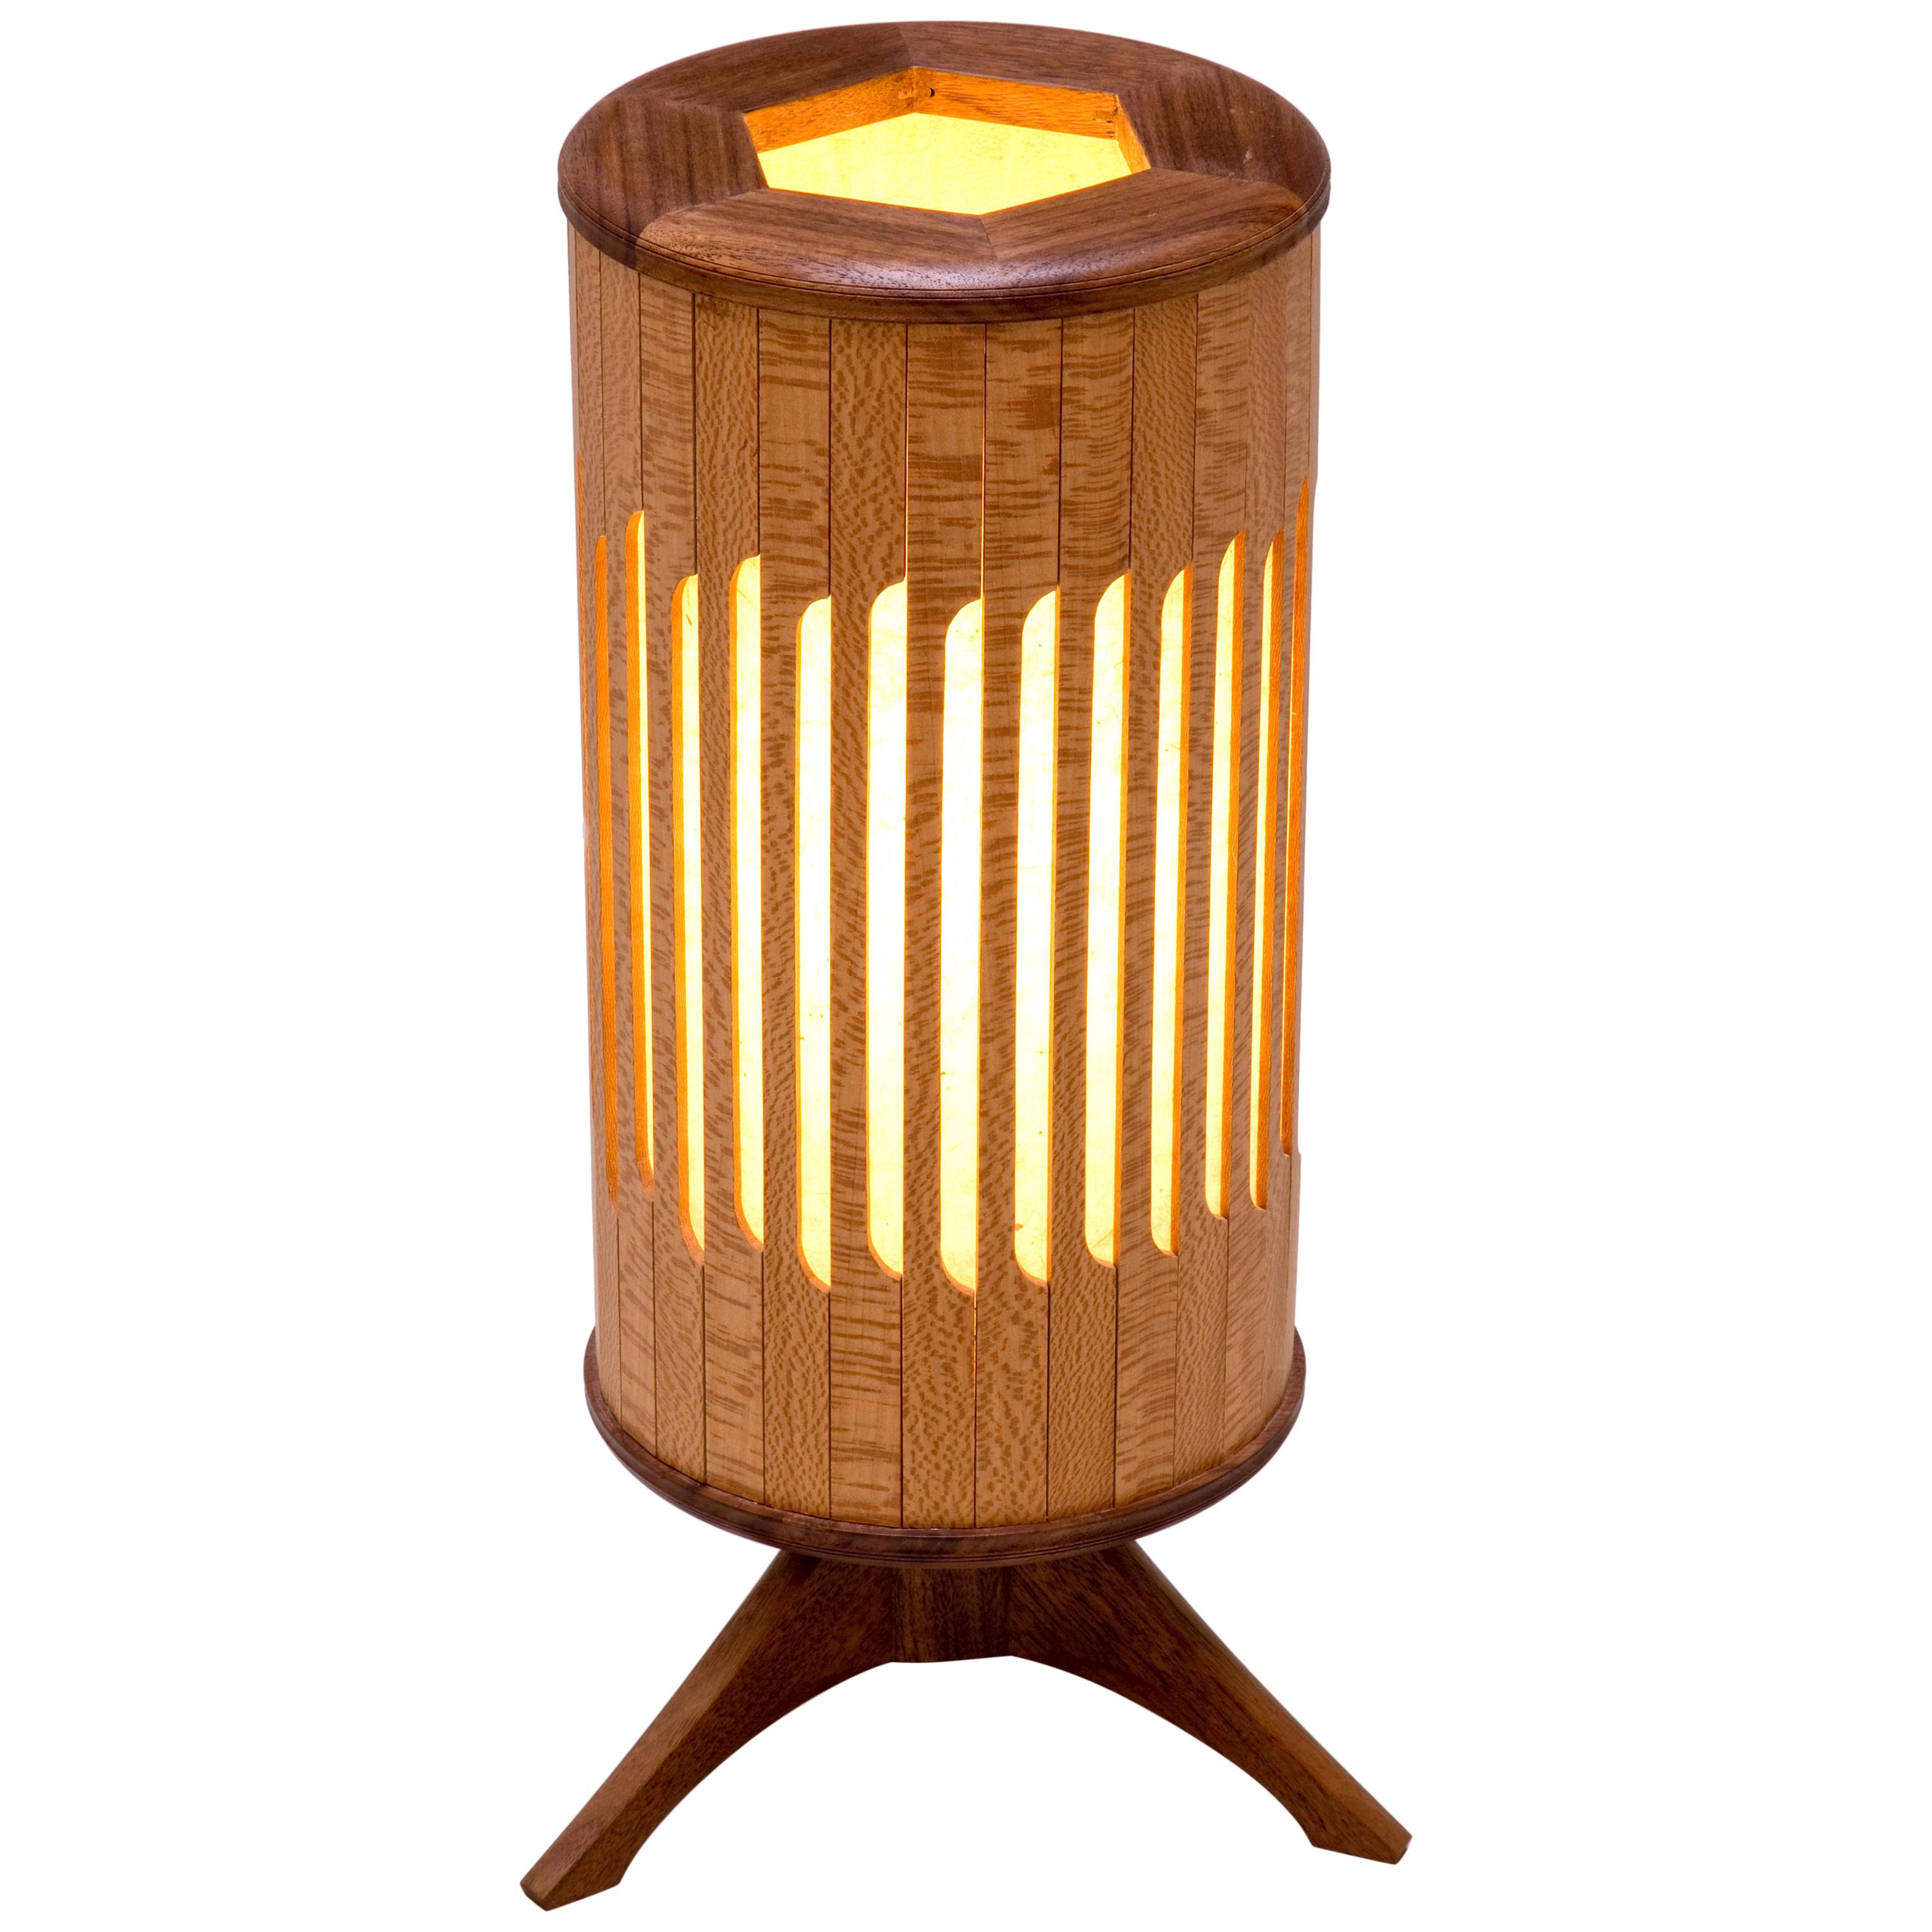 Tambour Table Lamp in Walnut, Lacewood, and Japanese Paper